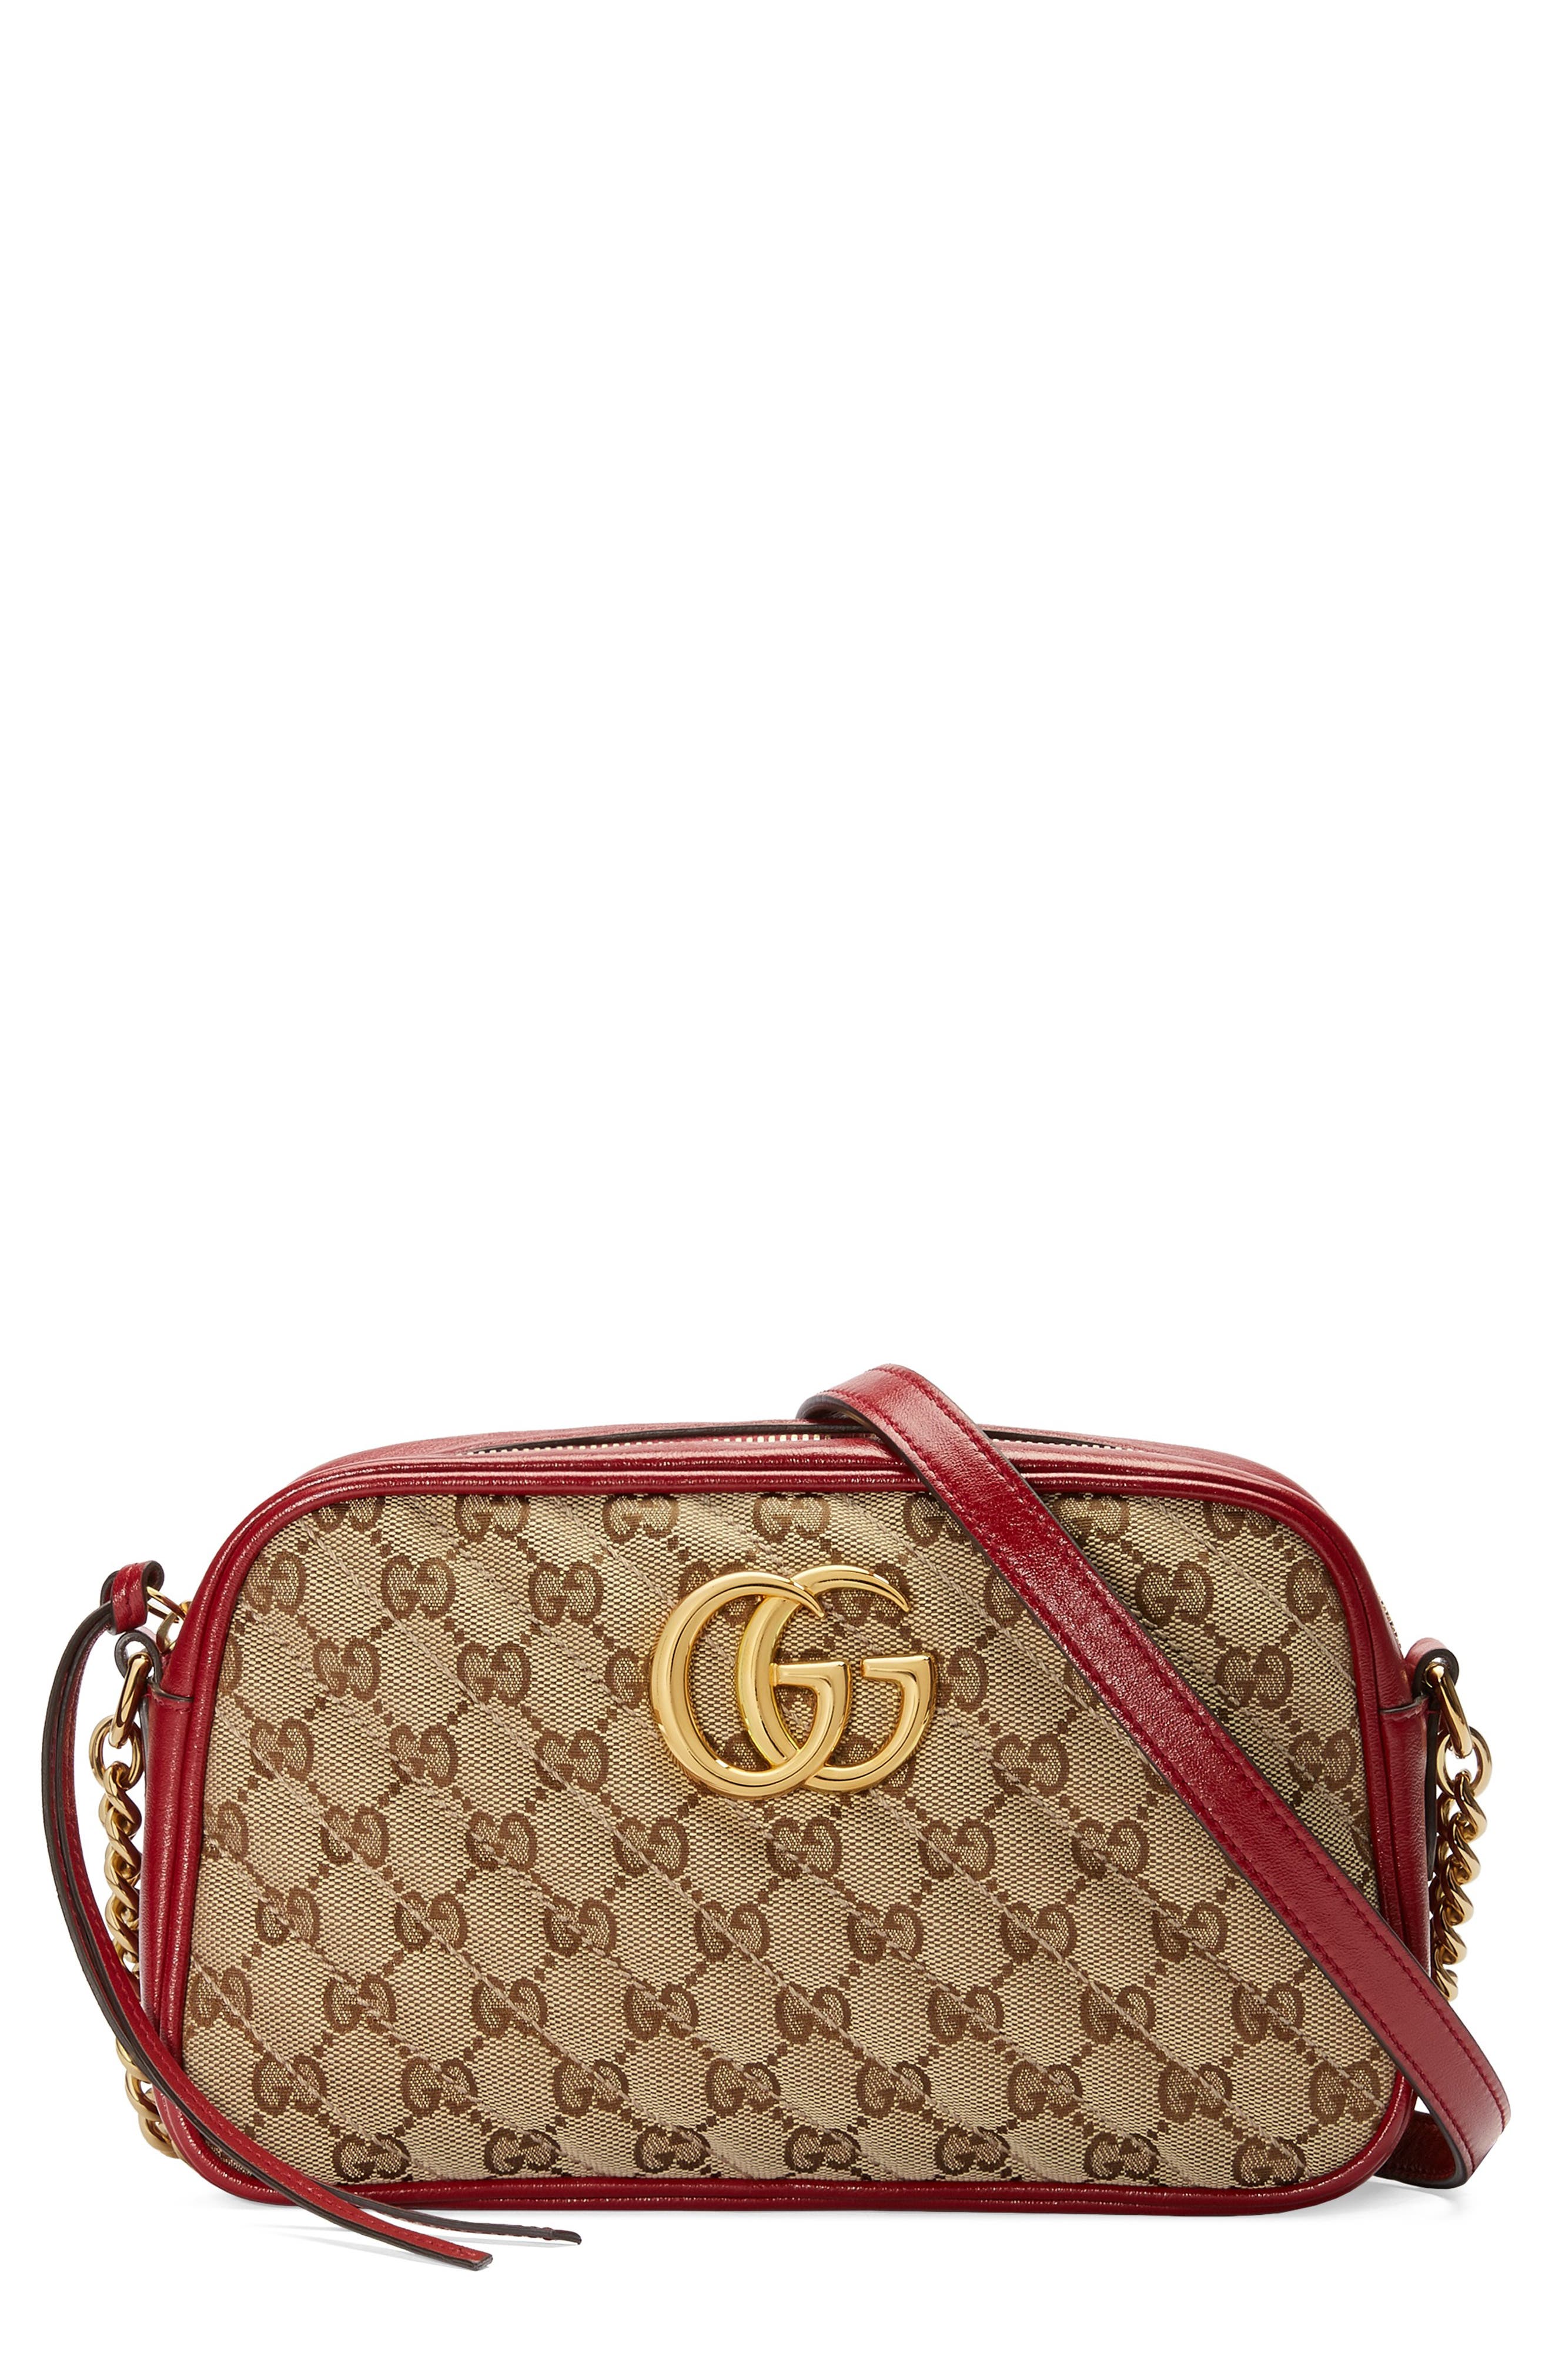 gucci marmont small nordstrom